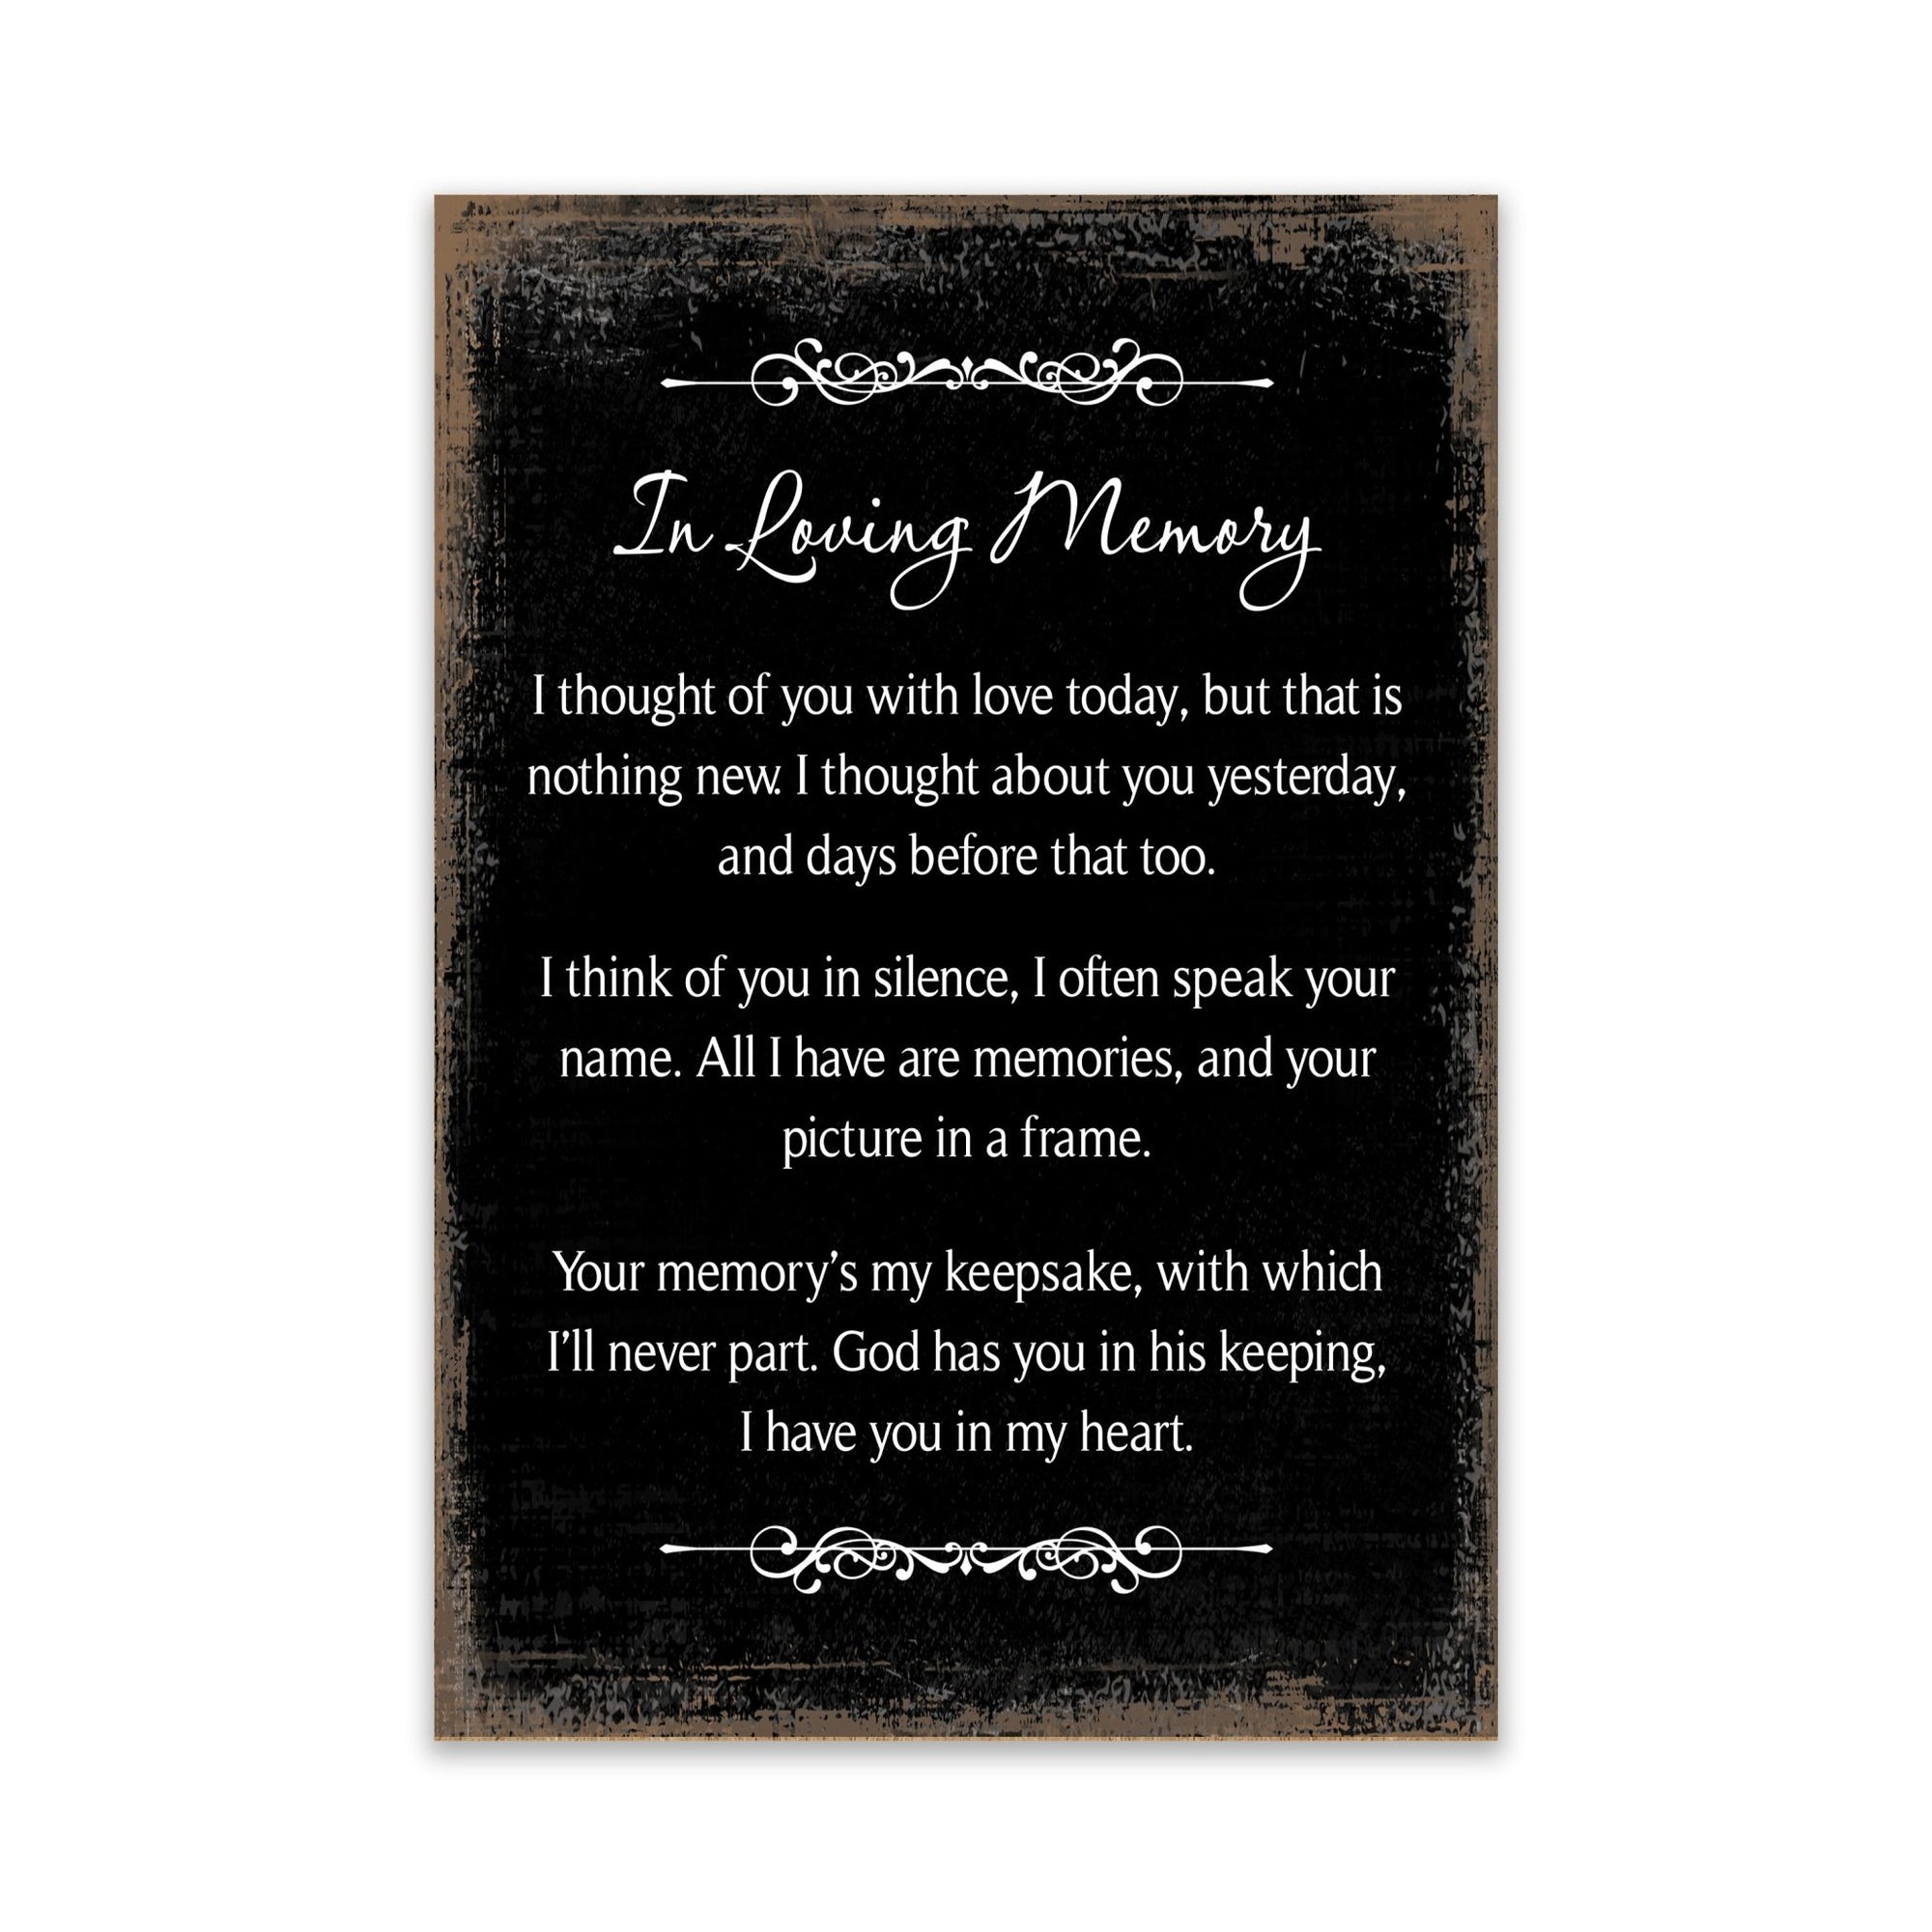 Modern Inspirational Memorial 5.5x 8 inches Wooden Sign I Have You In My Heart - Plaque Tabletop Decoration Loss of Loved One Bereavement Sympathy Keepsake - LifeSong Milestones